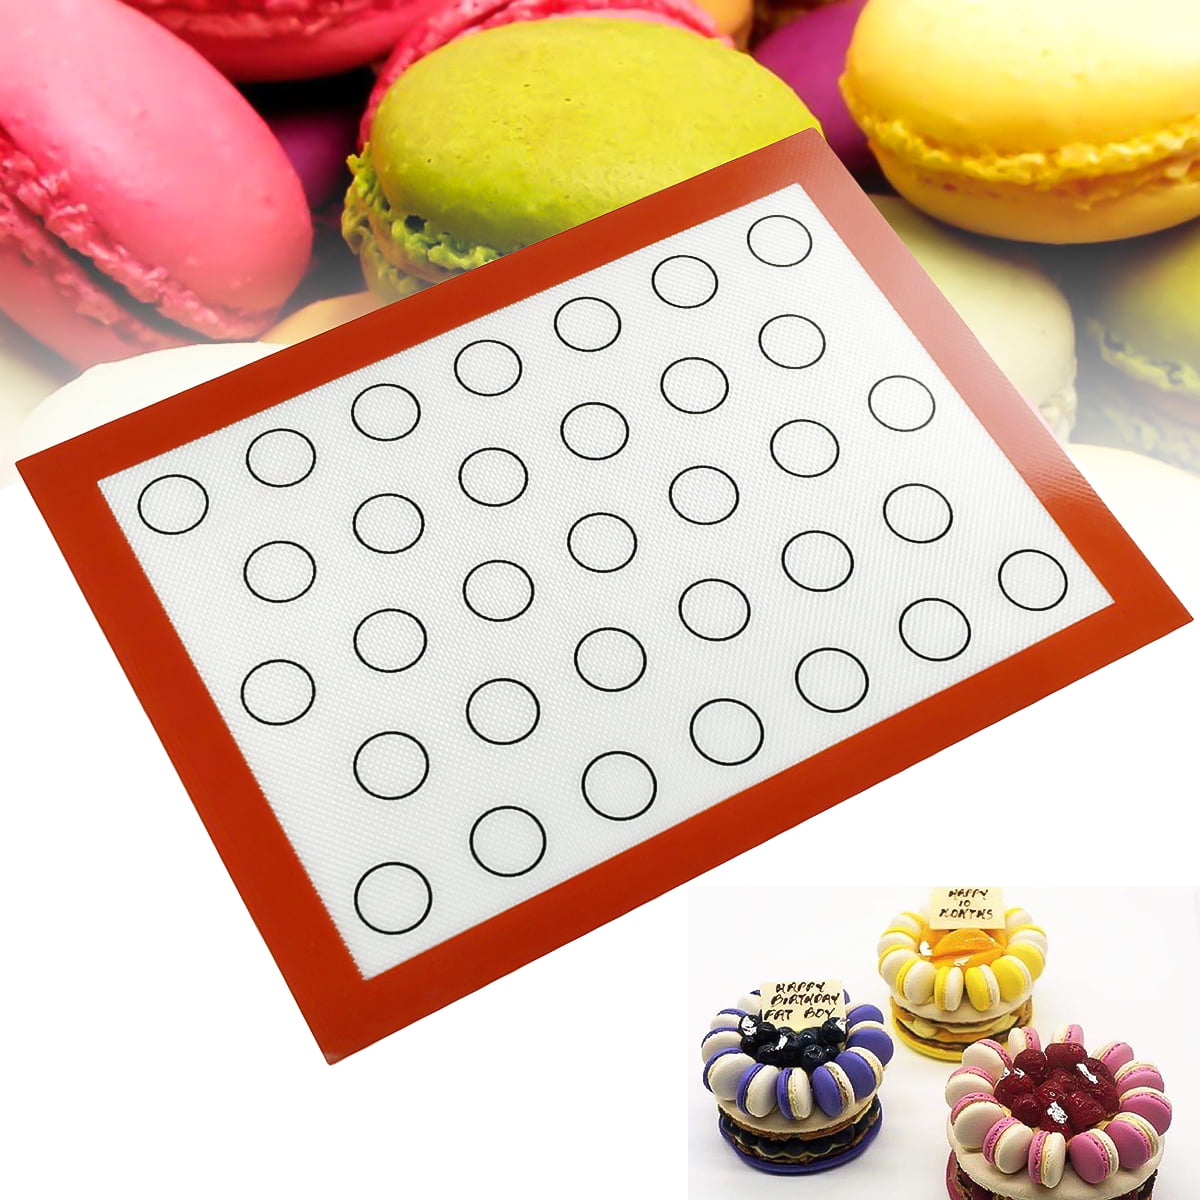 US 1PC Macaron Baking Mat Non Stick Silicone with 30 Macaroon Mould YM60 